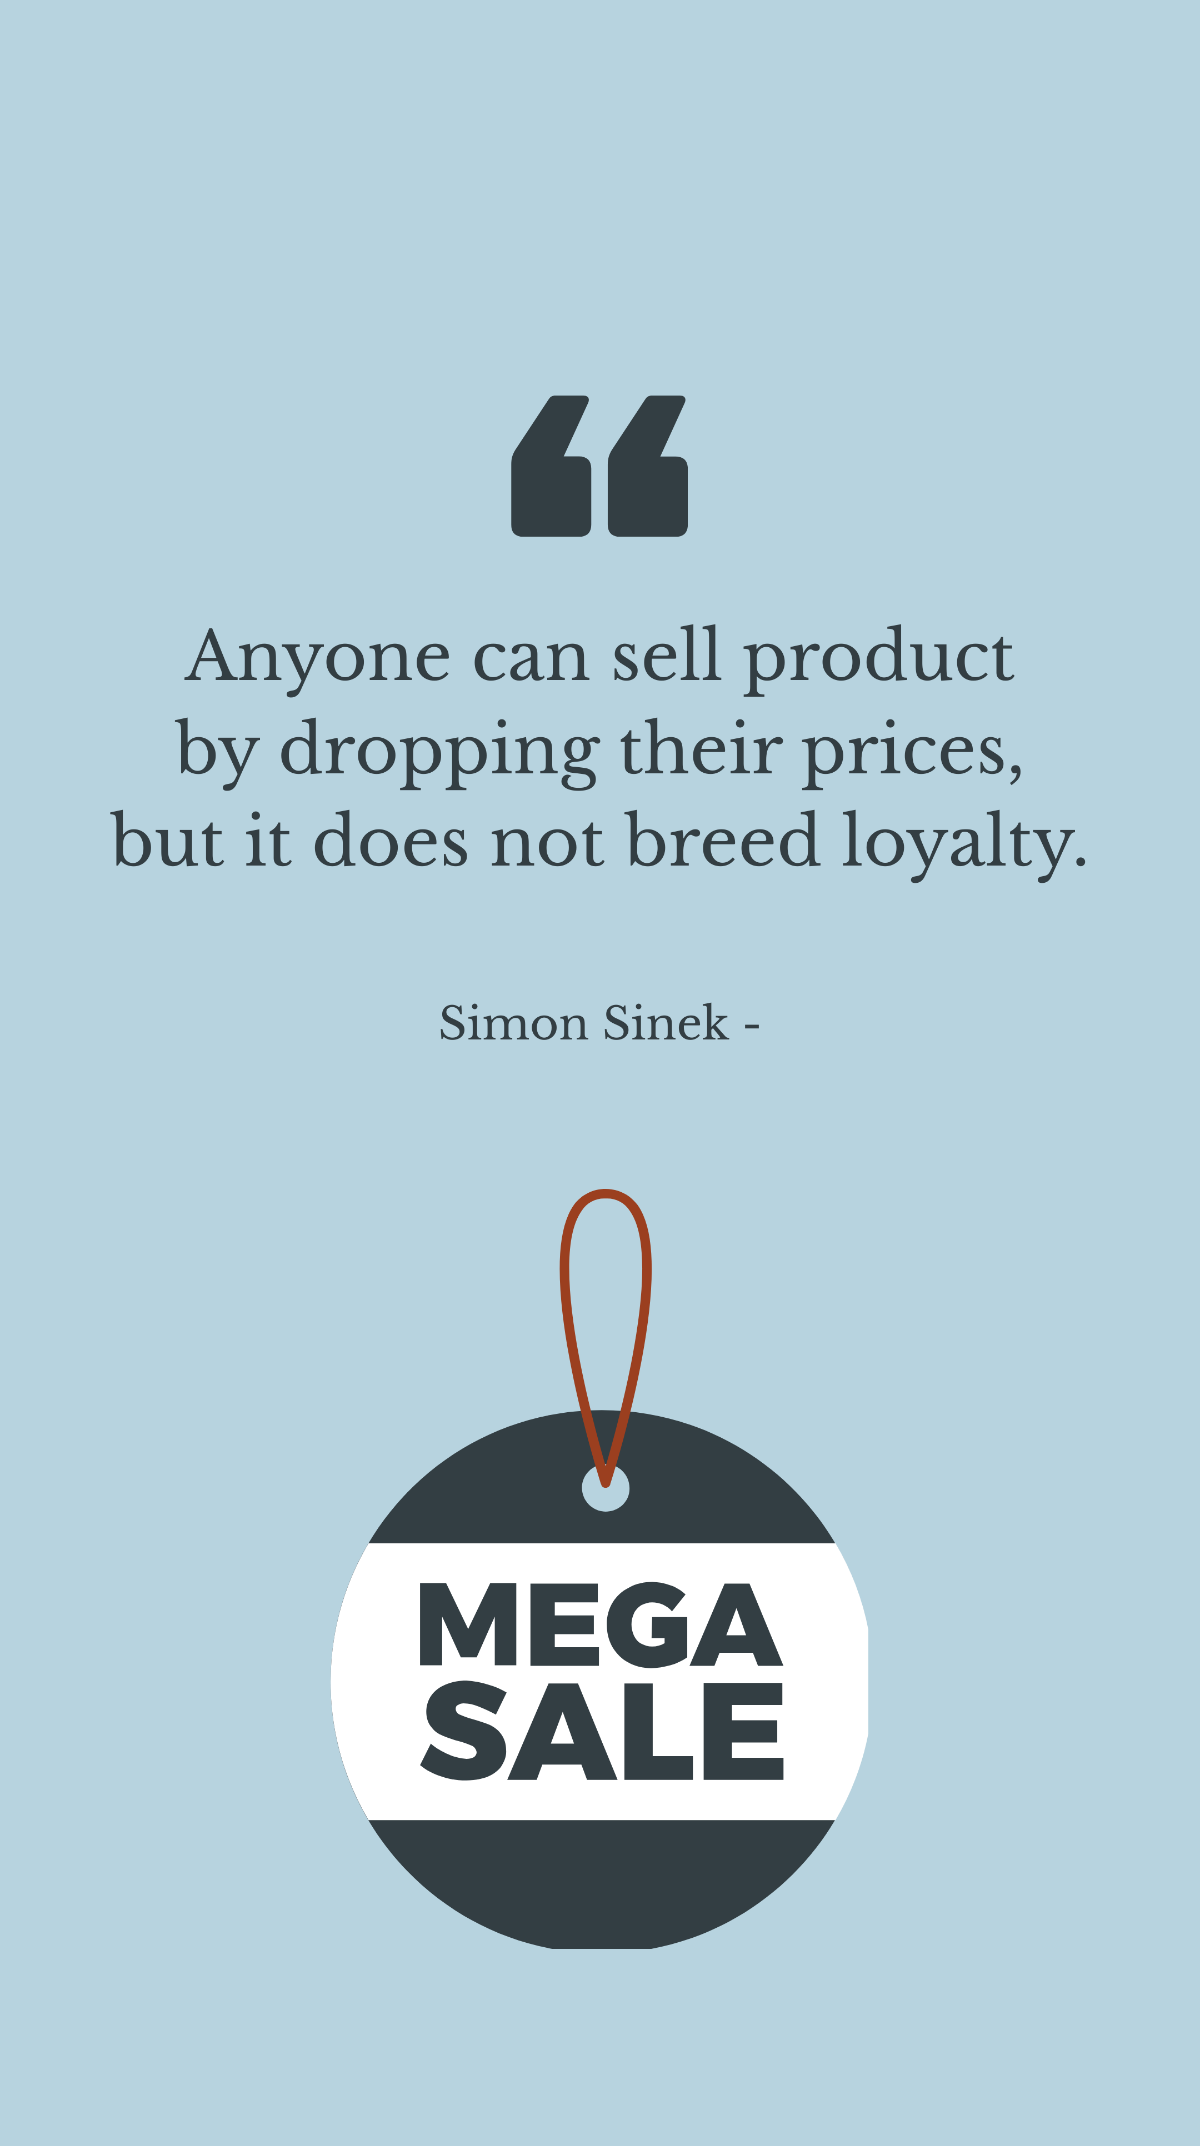 Free Simon Sinek - Anyone can sell product by dropping their prices, but it does not breed loyalty. Template